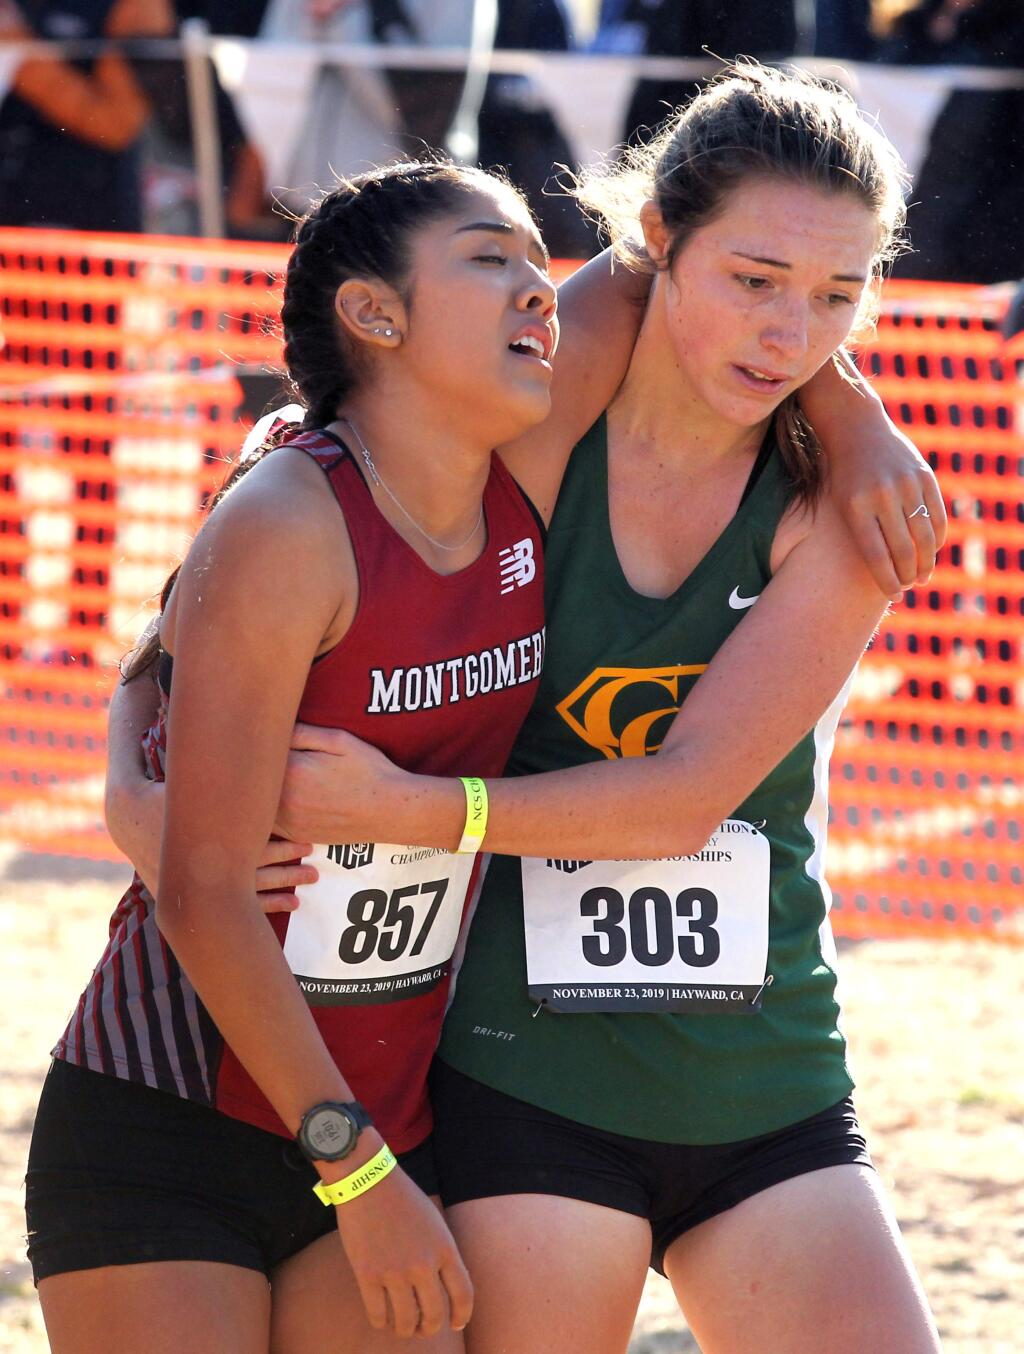 Mariah Briceno of Montgomery High, left, is hugged by Casa Grande's Emma Baswell after they finished the Division 3 girls race at the NCS cross country championships in Hayward on Saturday, Nov. 23, 2019. (Photo by Darryl Bush / For The Press Democrat)